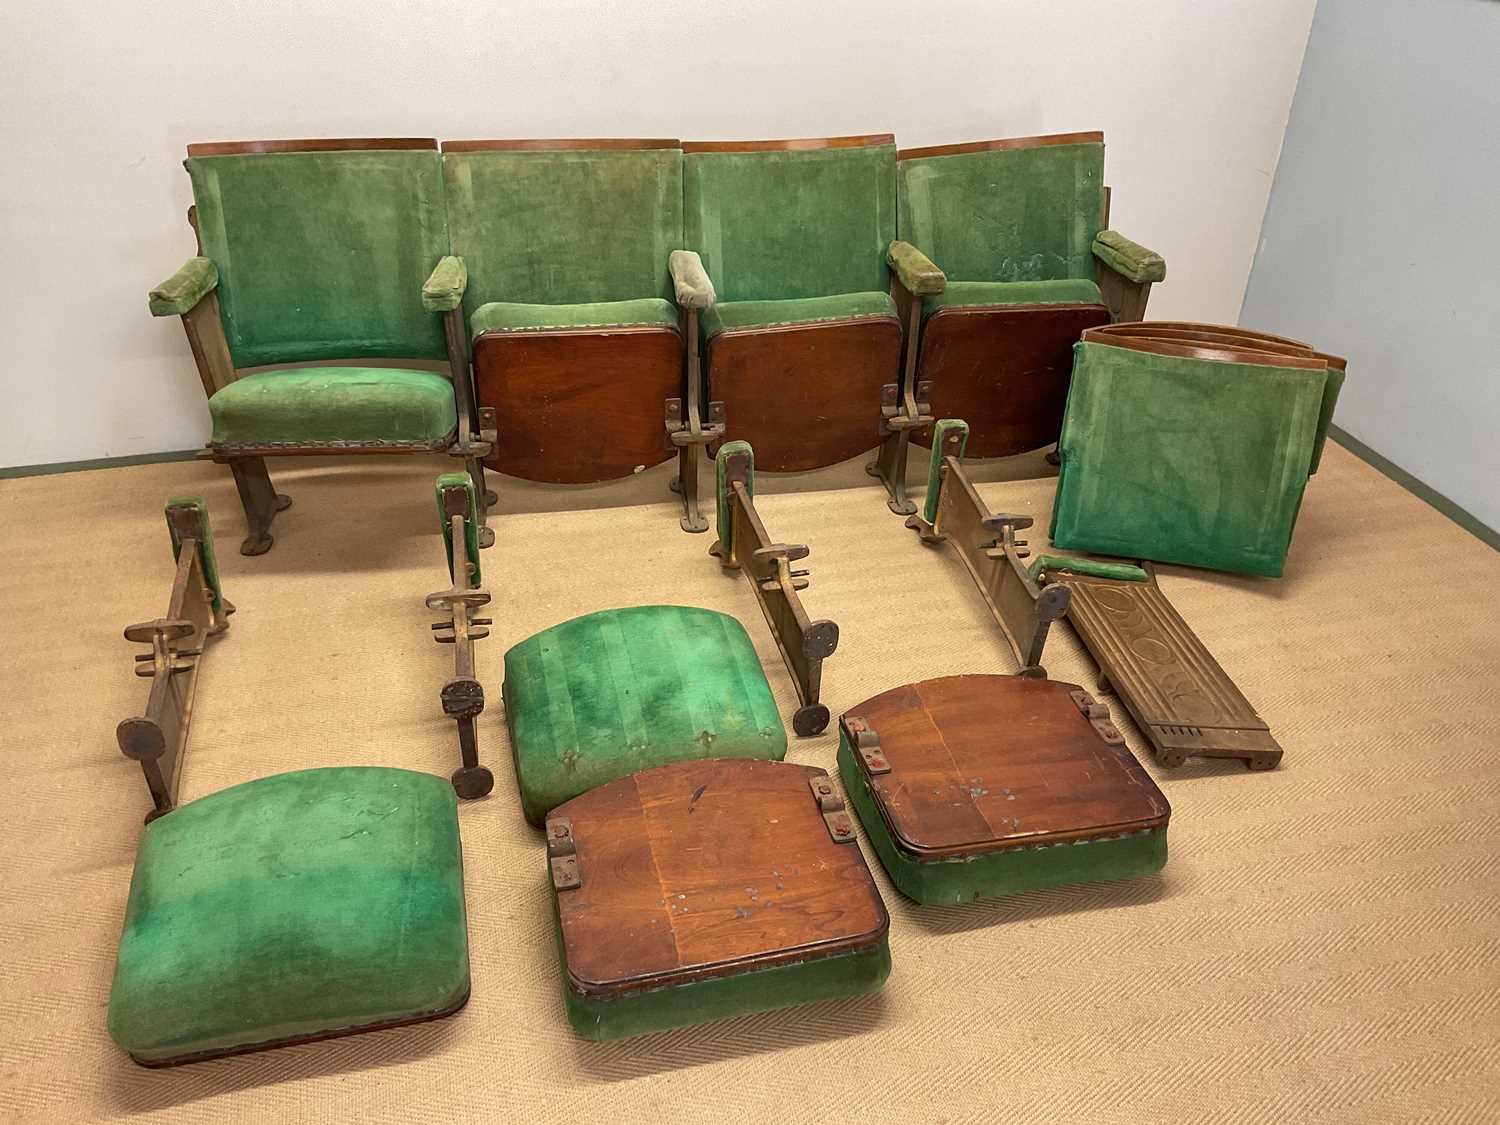 Two rows of four cinema seats with cast iron structures, and one end on each row of four, with green